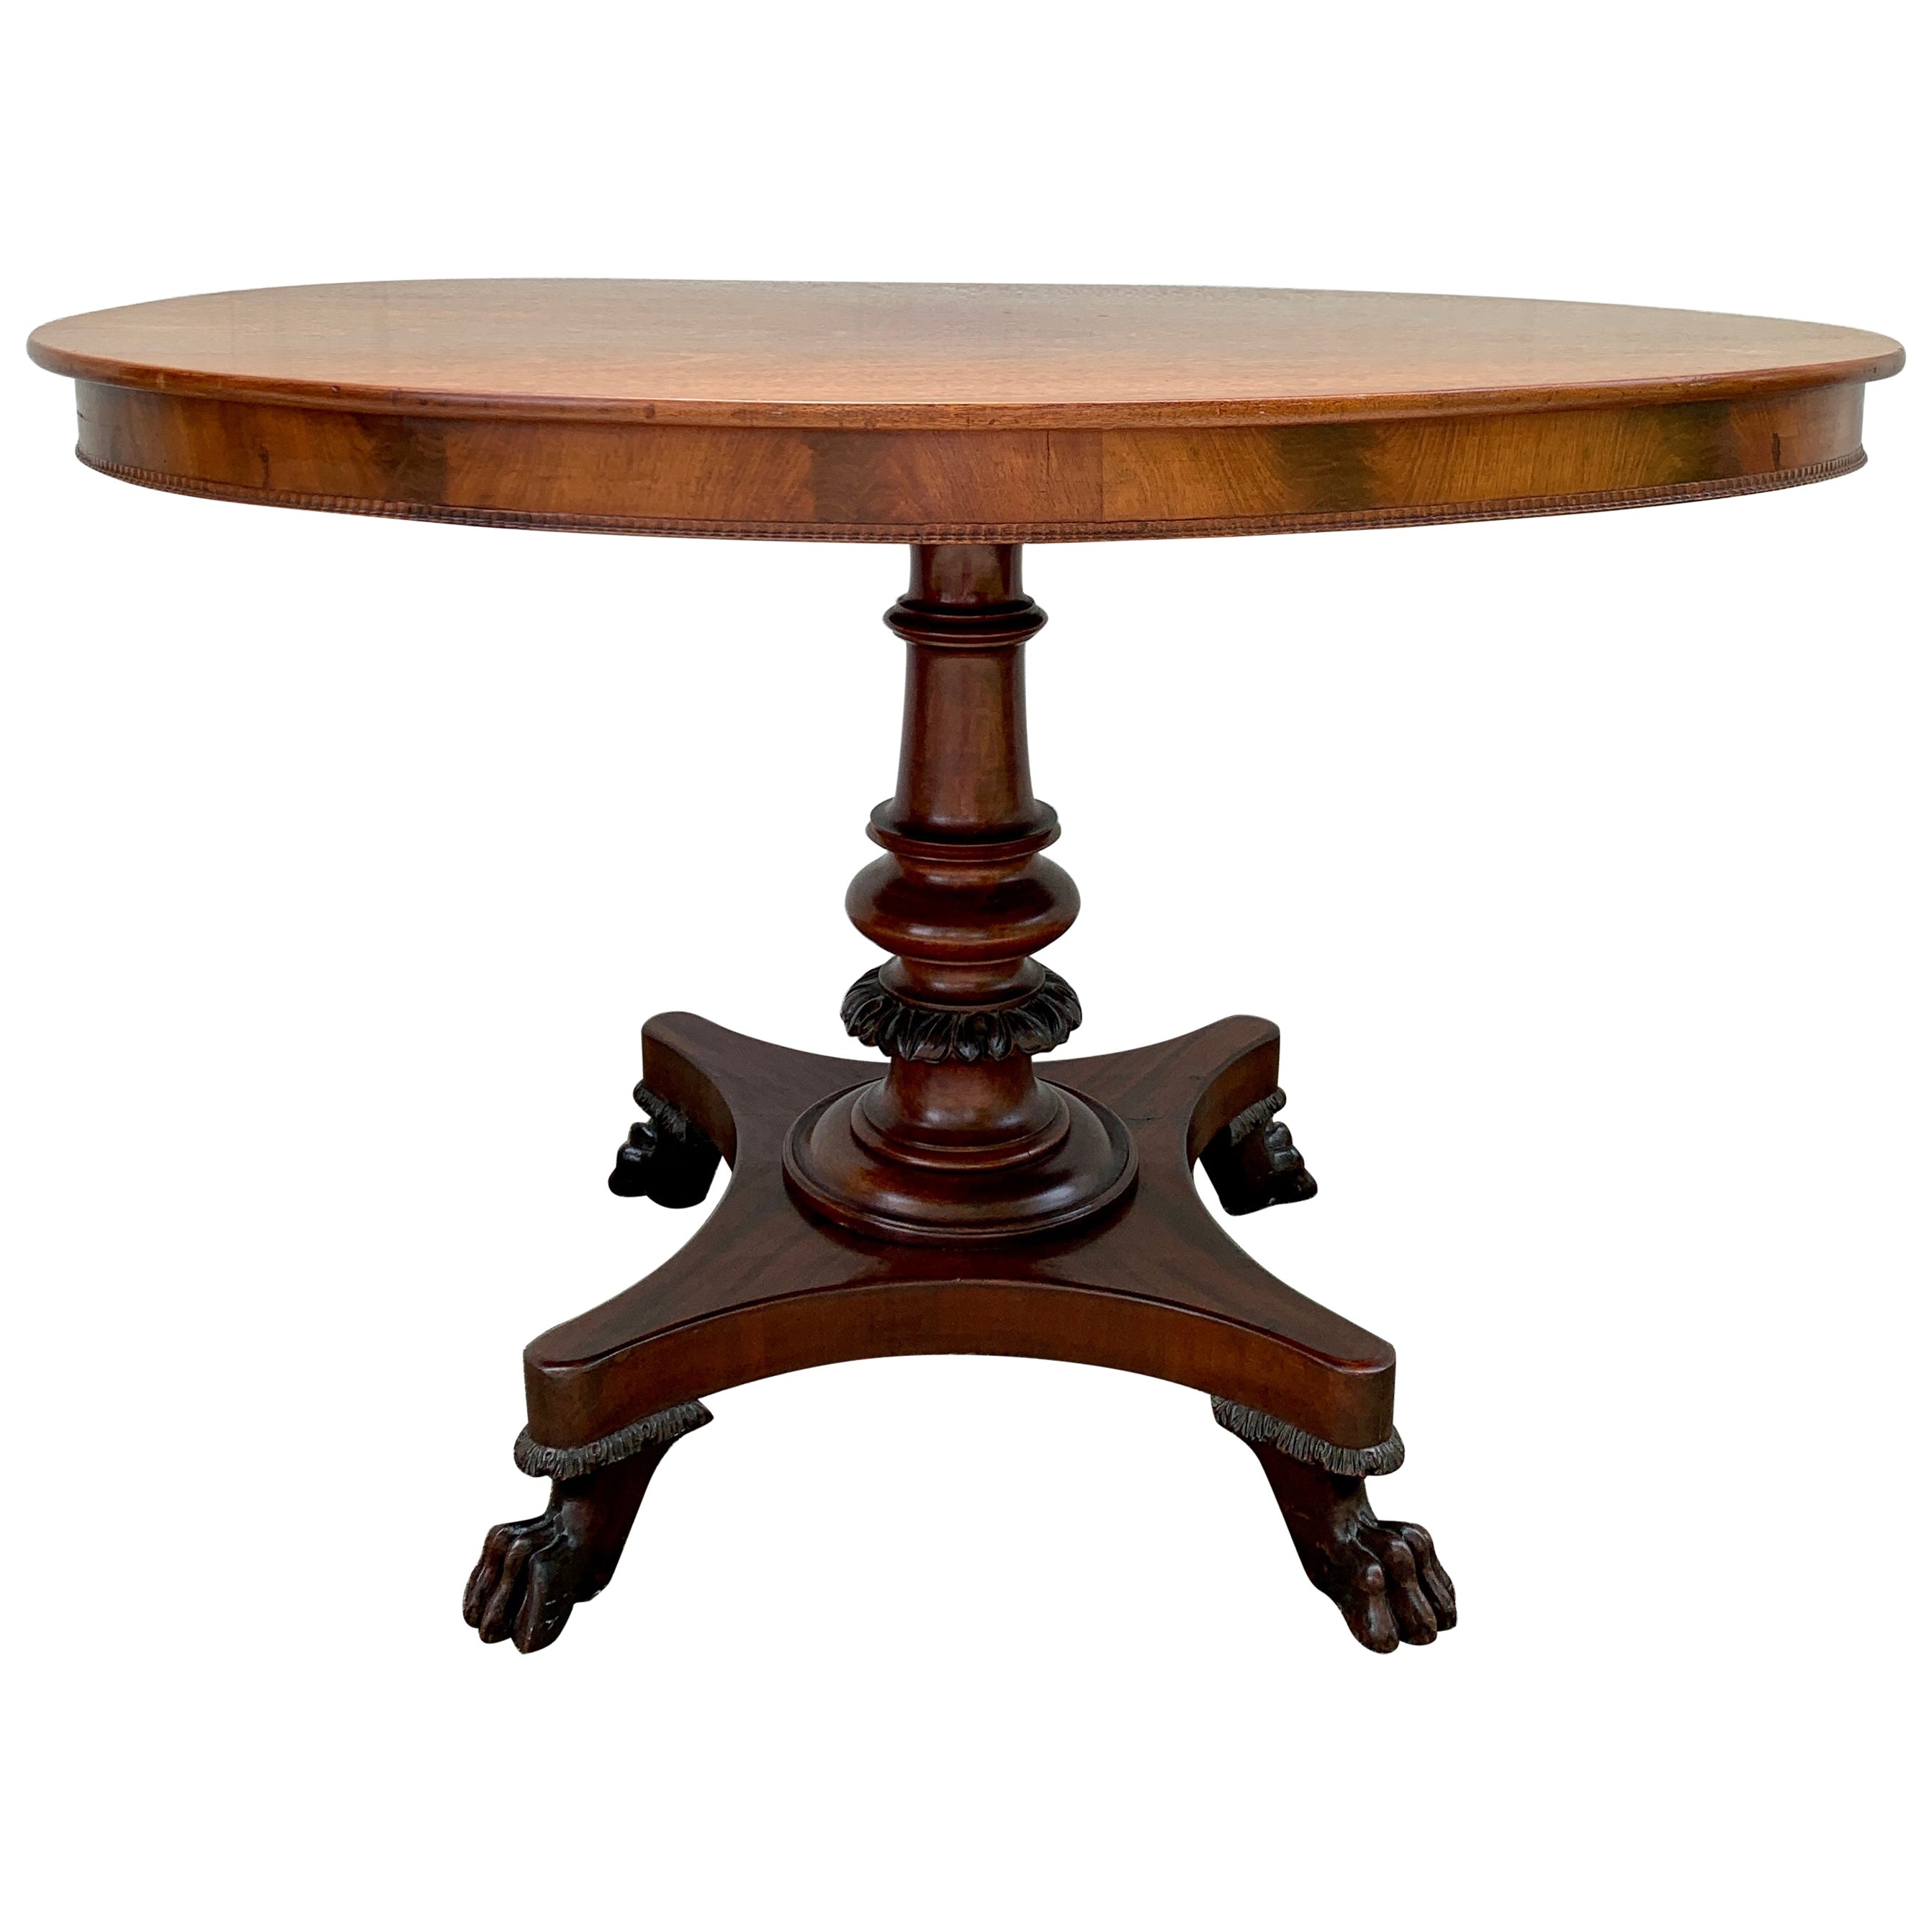 Antique American Empire Mahogany Paw Foot Pedestal Center Table